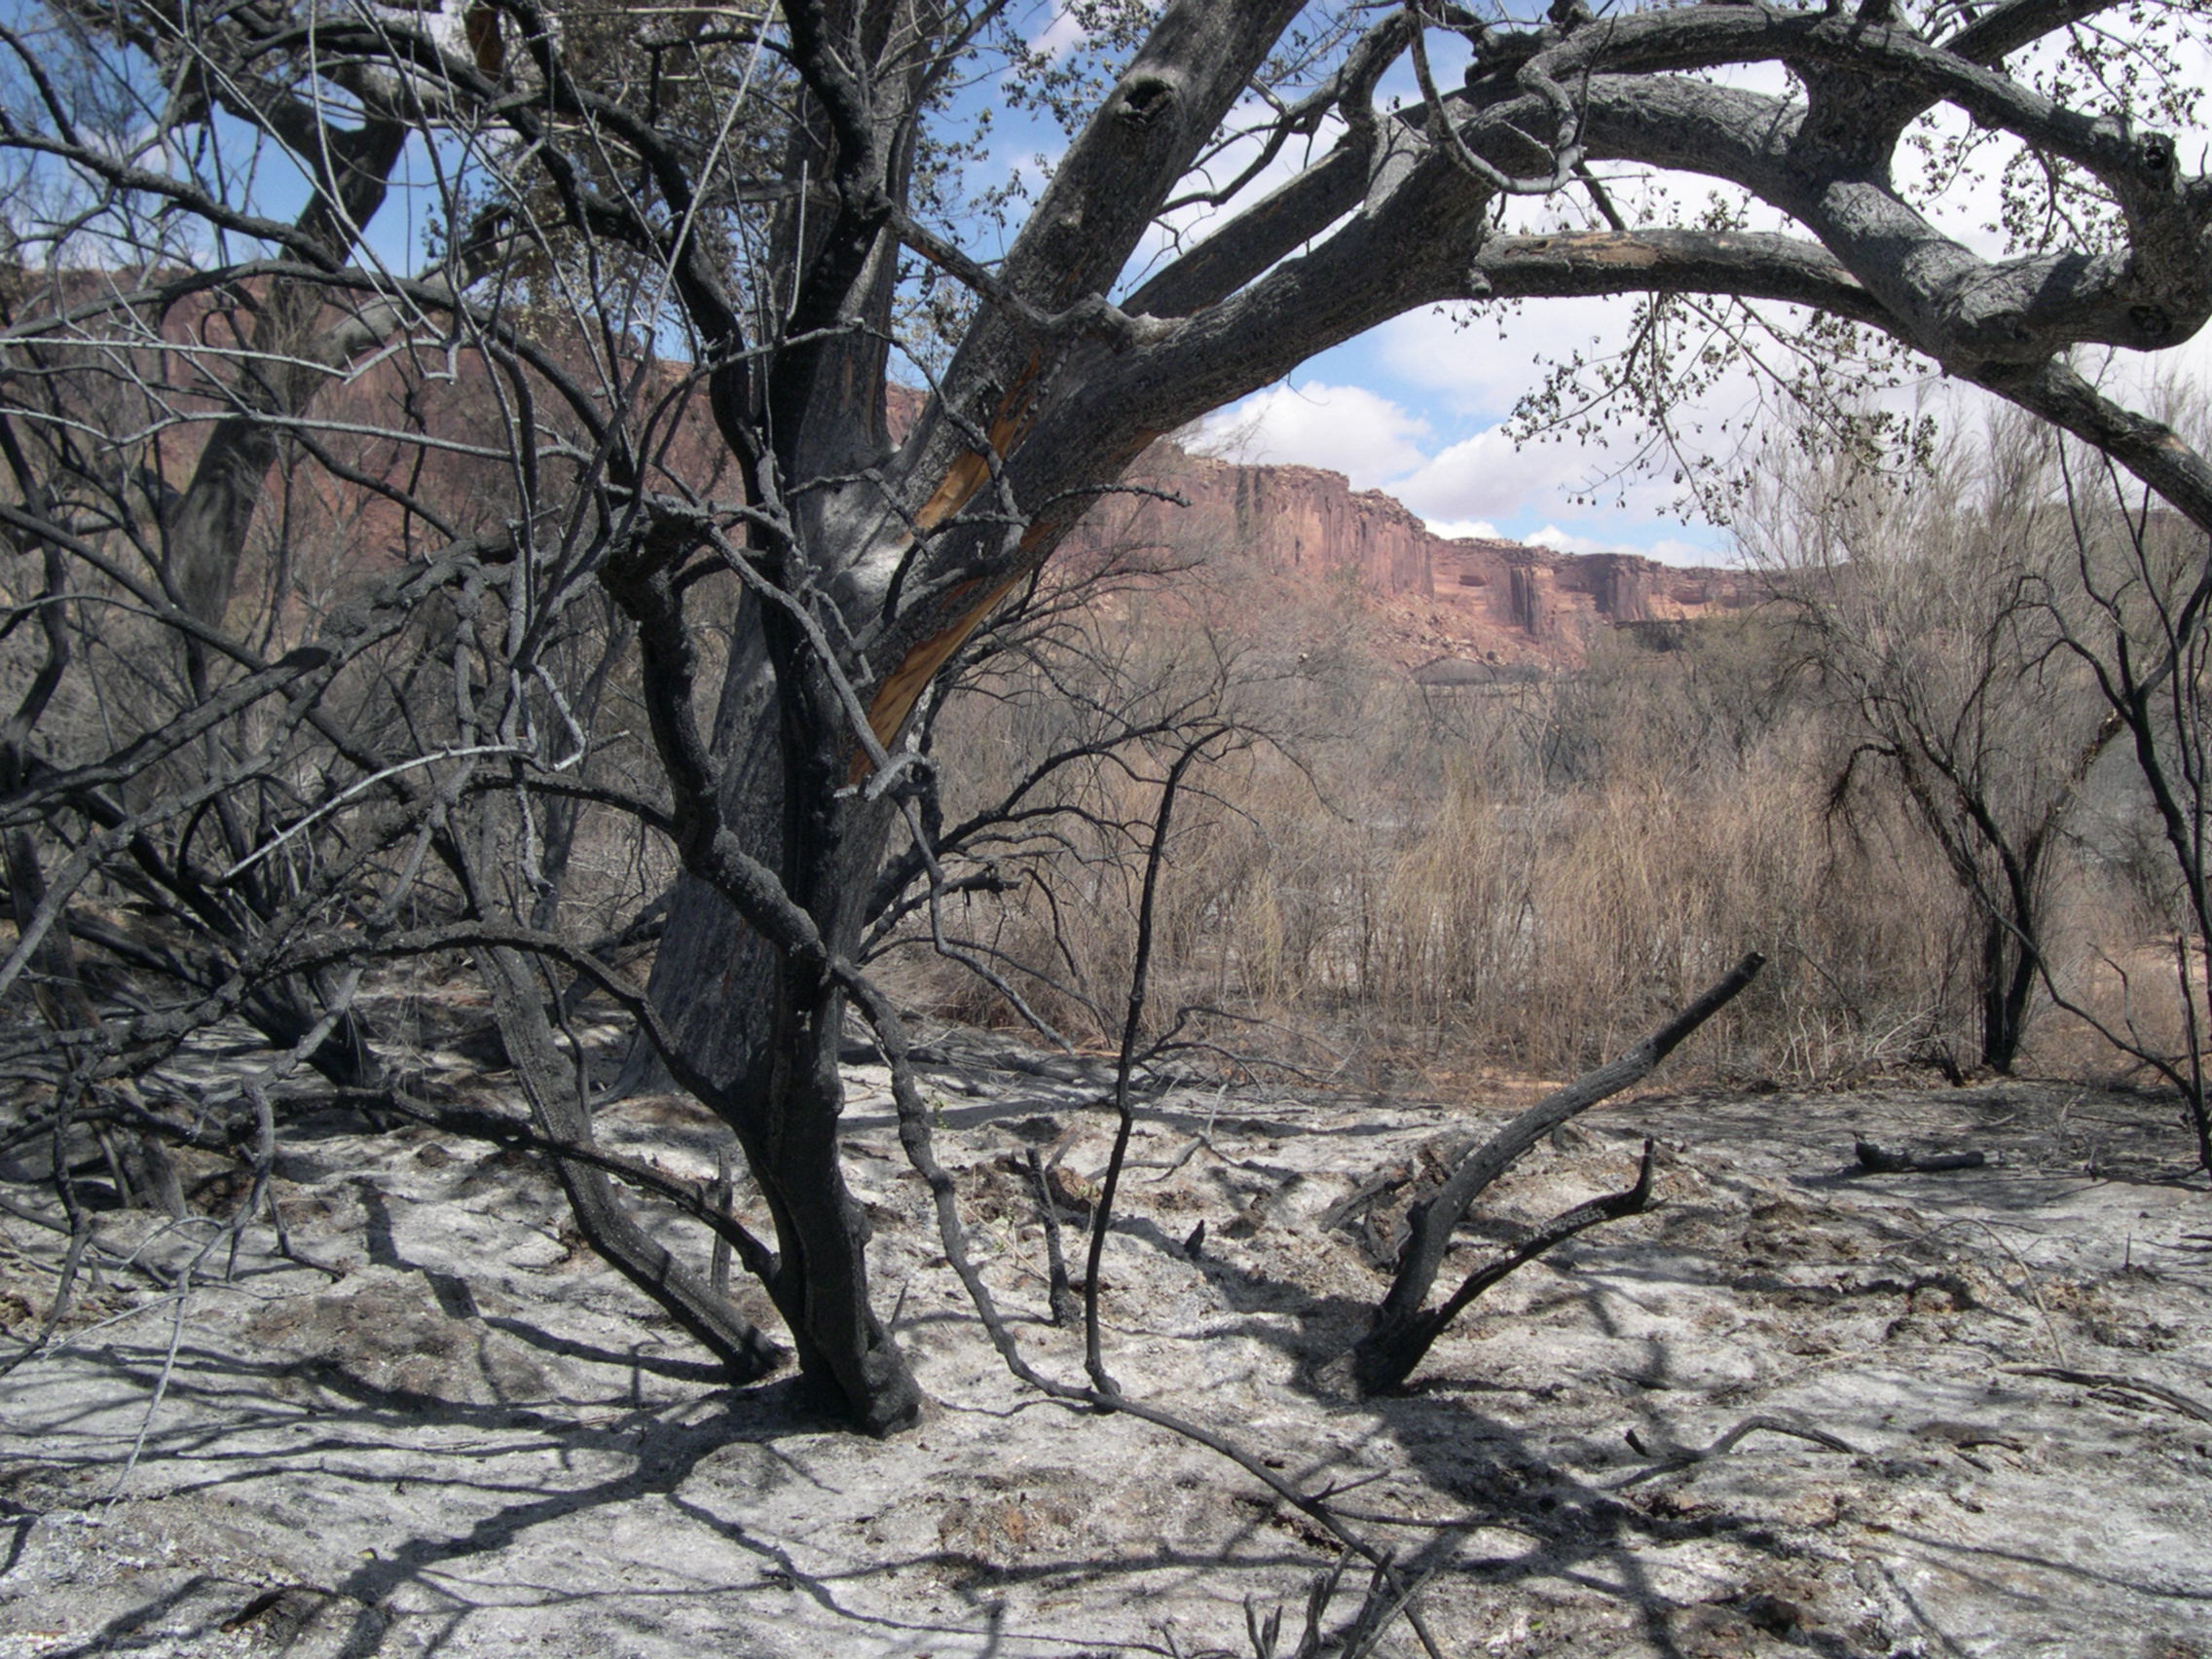 Charred, black trees and vegetation lined a gray and white ashy trail.